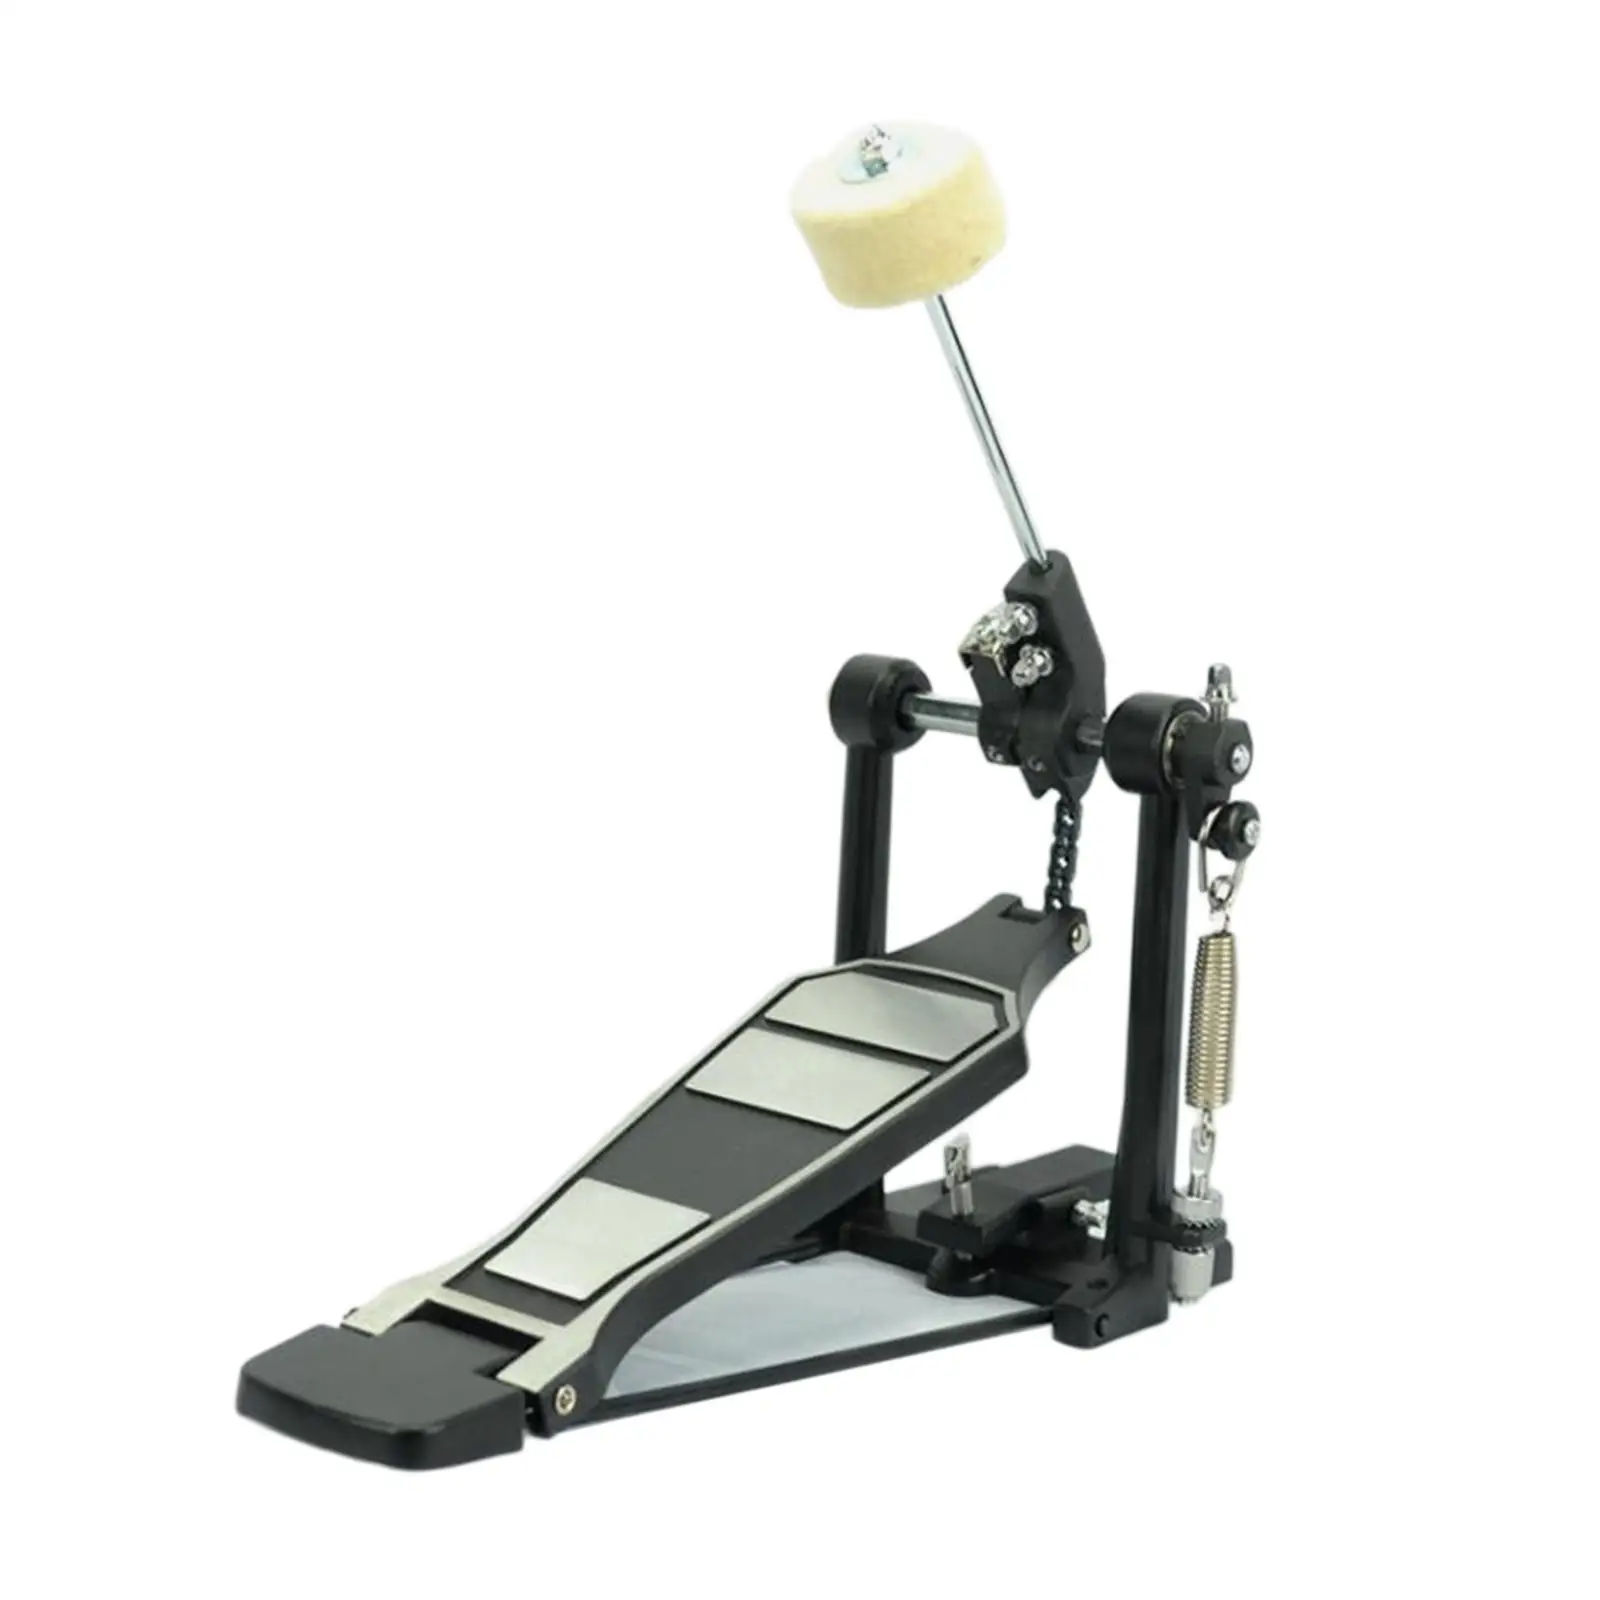 Bass Drum Pedal Chain Drive Drum Step for Drum Set Instrument Portable Universal for Jazz Drums Drummer Gifts Drum Beater Kick